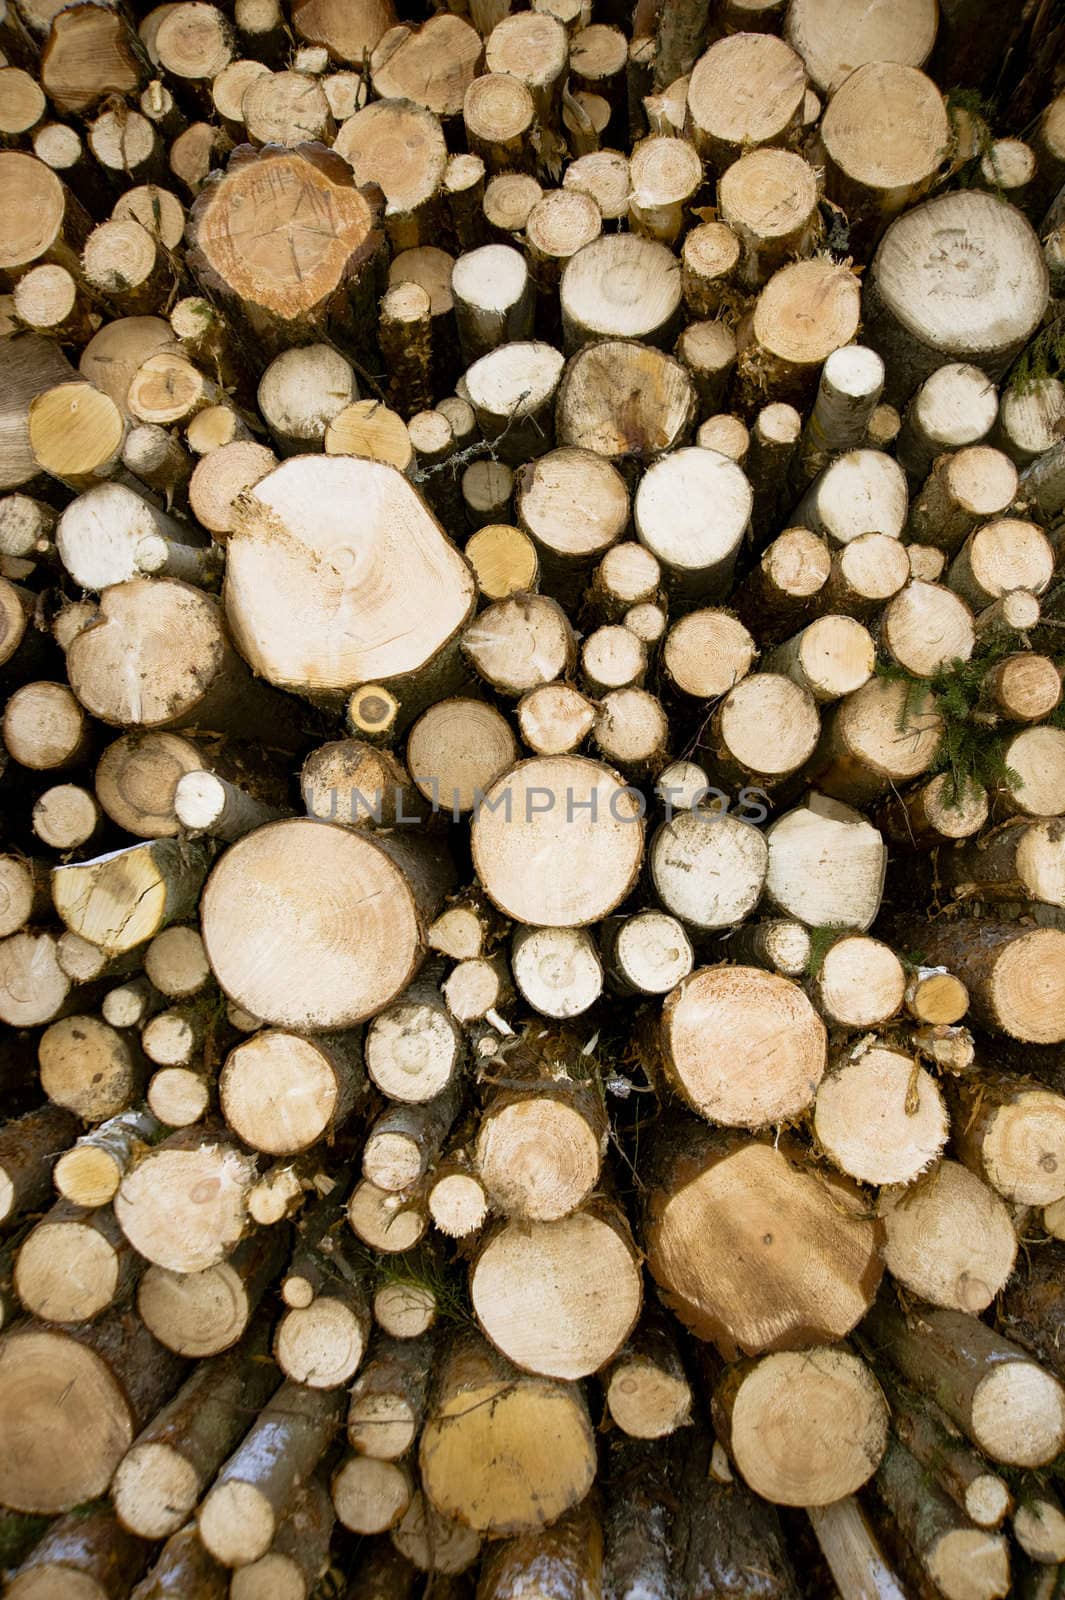 A logs storage neatly stacked near the forest path
